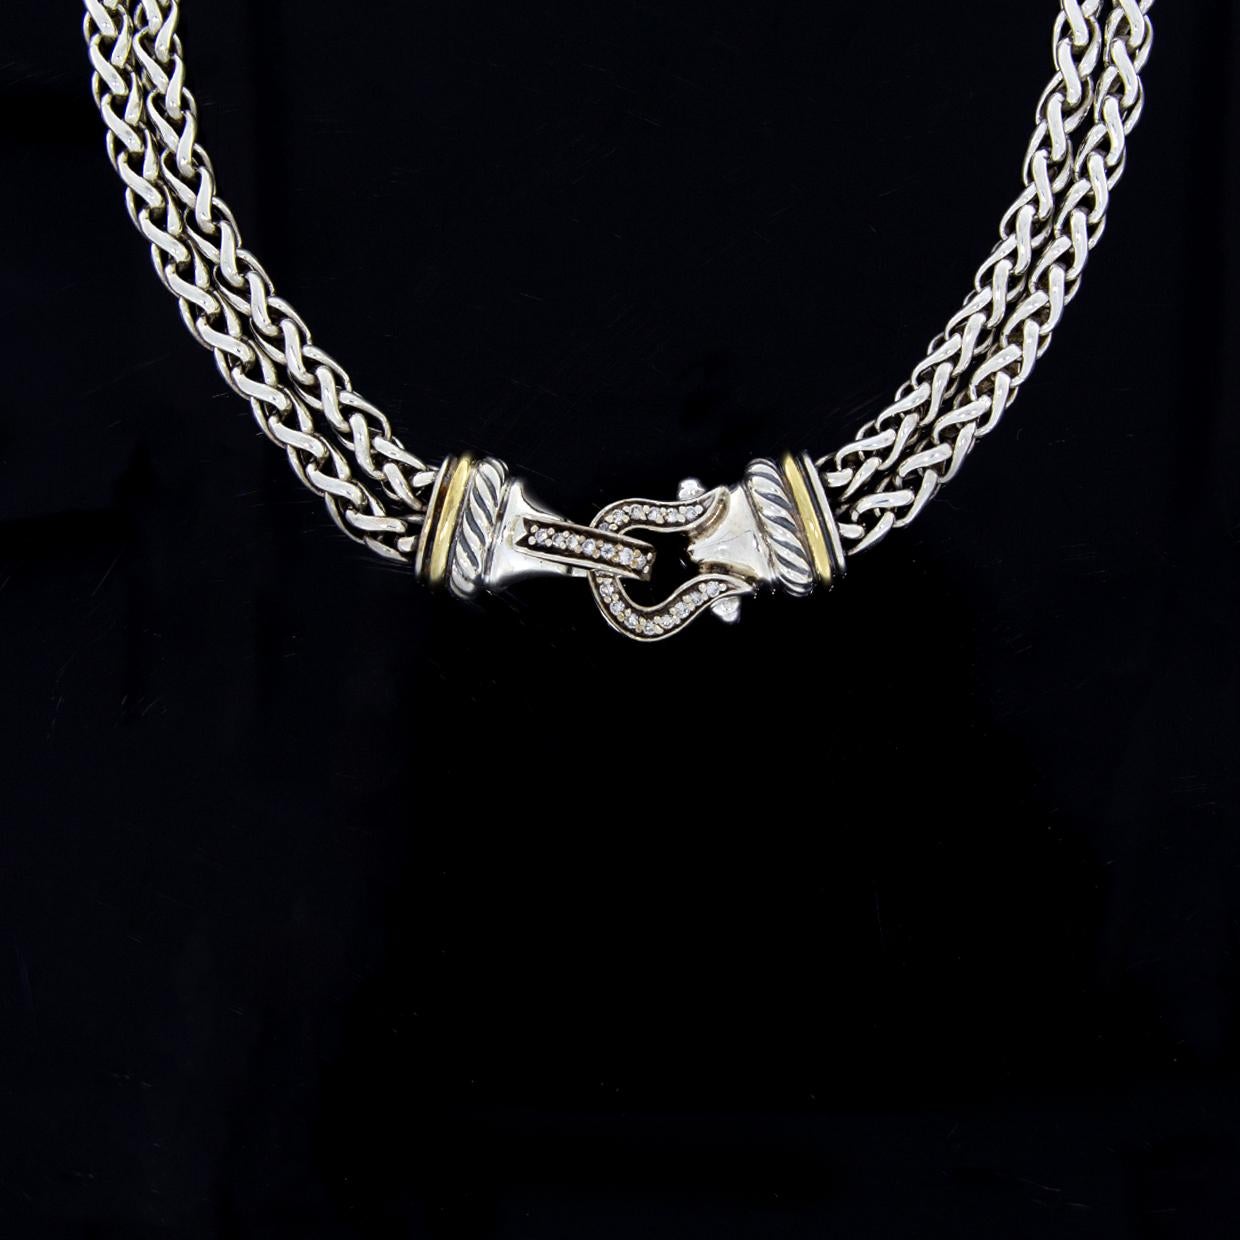 Item Details:
Brand - David Yurman
Metal - Sterling Silver & 18 Karat Yellow Gold
Main Stone - Diamond
Main Stone Total Weight - 0.18 Carat
Style - Choker Necklace
Fastening - Box
Length (inches) - 15 in
Estimated Retail - $1,650

The history of